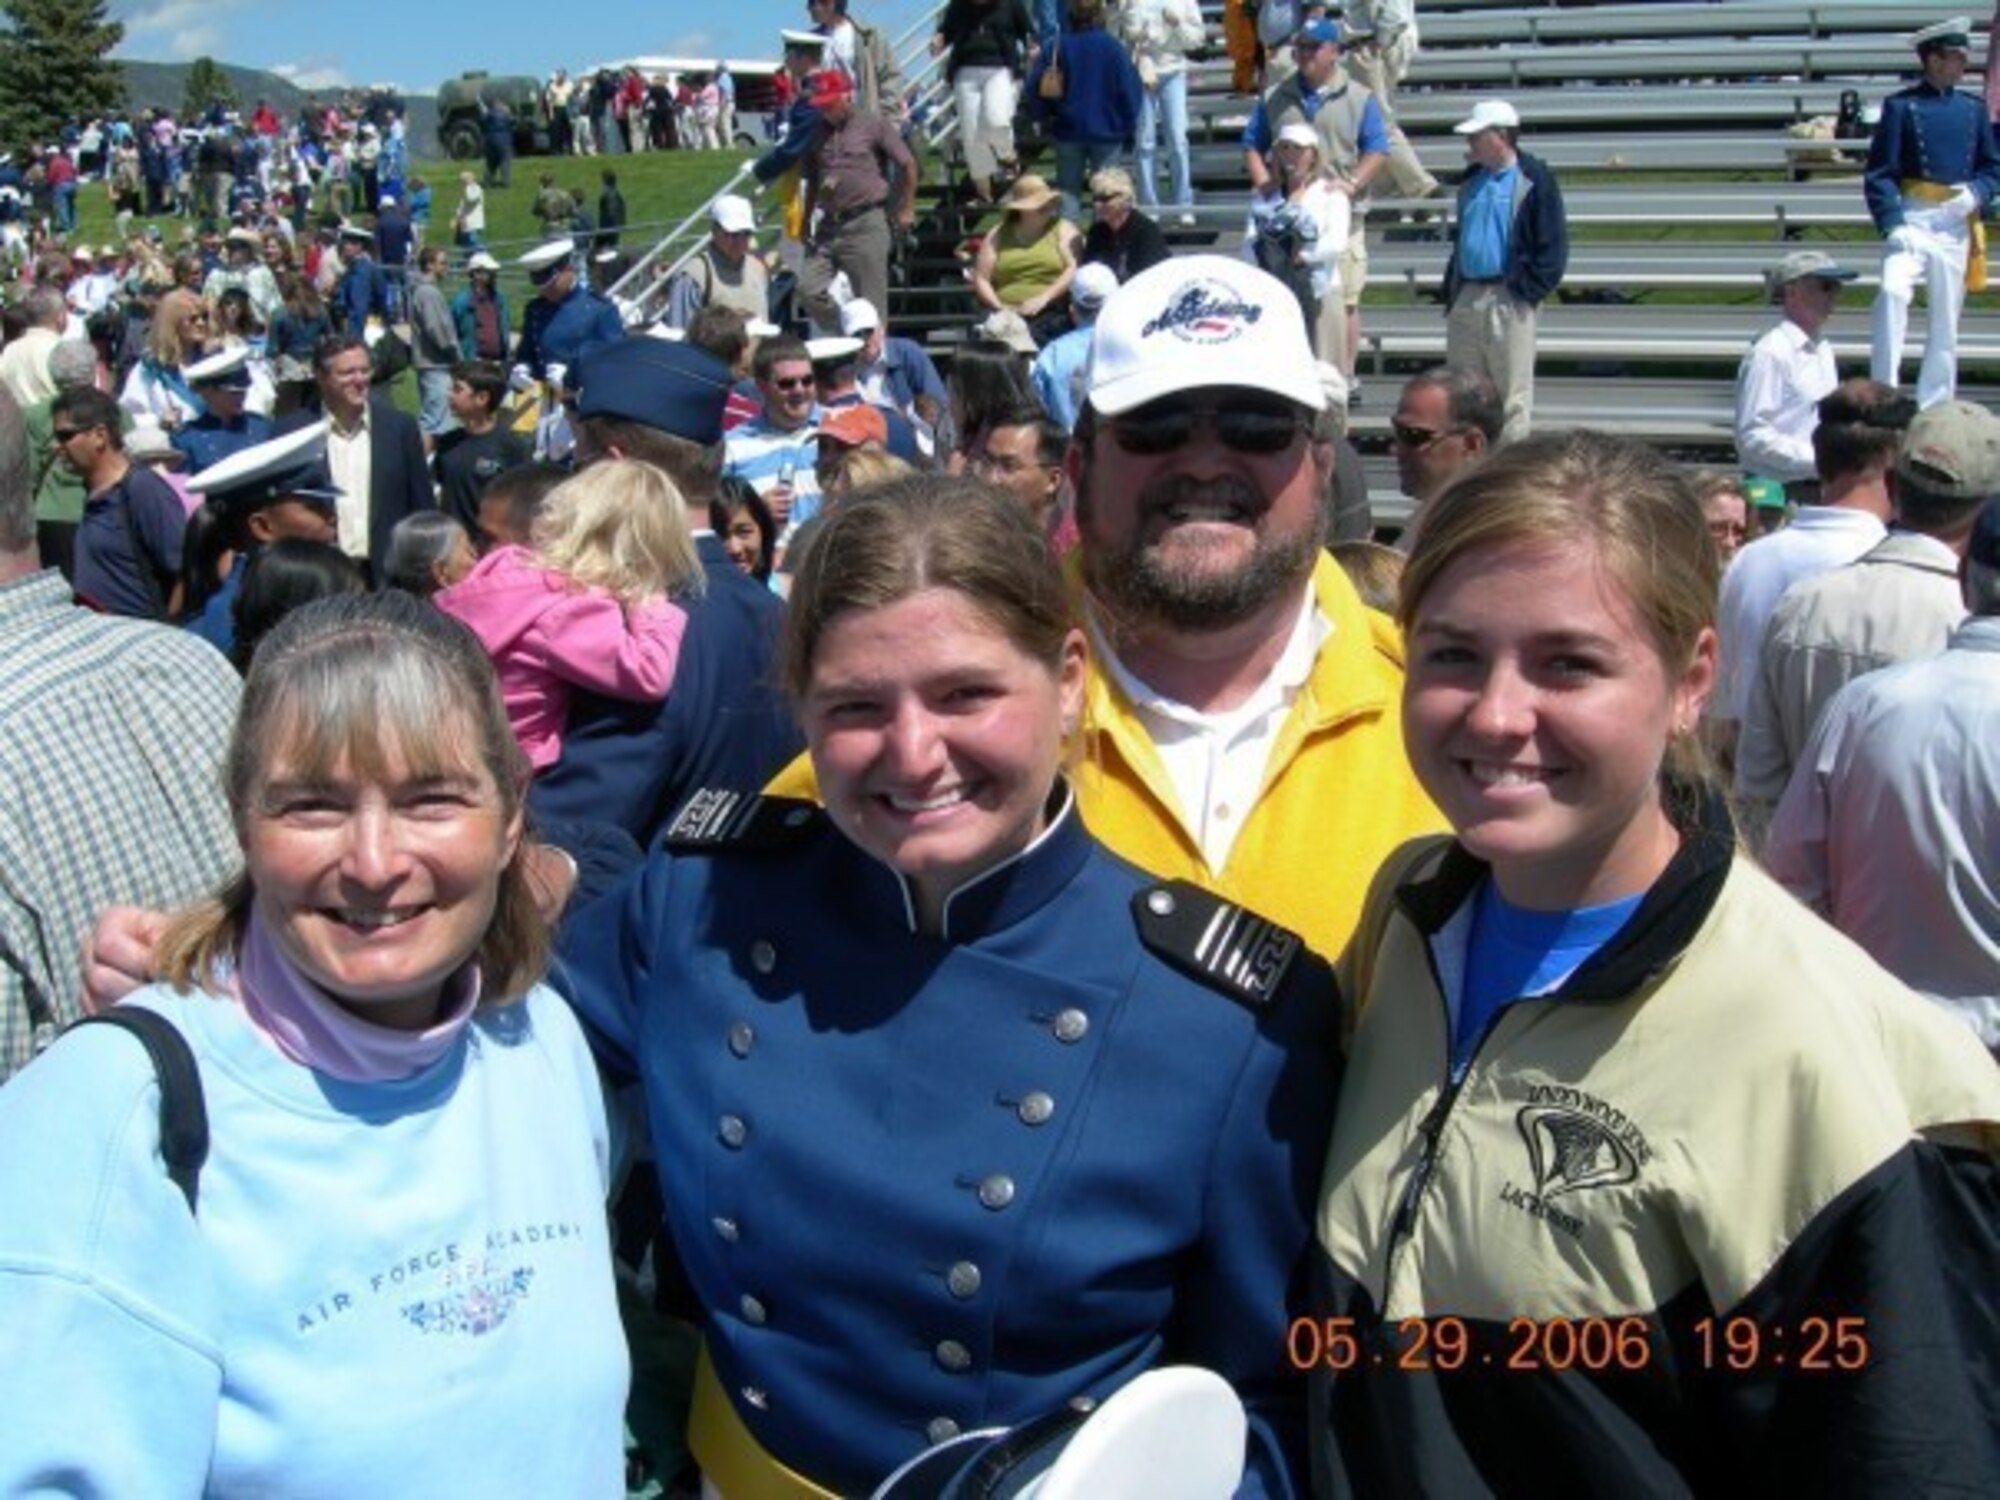 Lt. Col. Bridgett “Atlas” Fitzsimmons, 334th Fighter Squadron director of operations, poses with her family after graduating from the U.S. Air Force Academy in, Colorado Springs, Colorado, May 31, 2006.